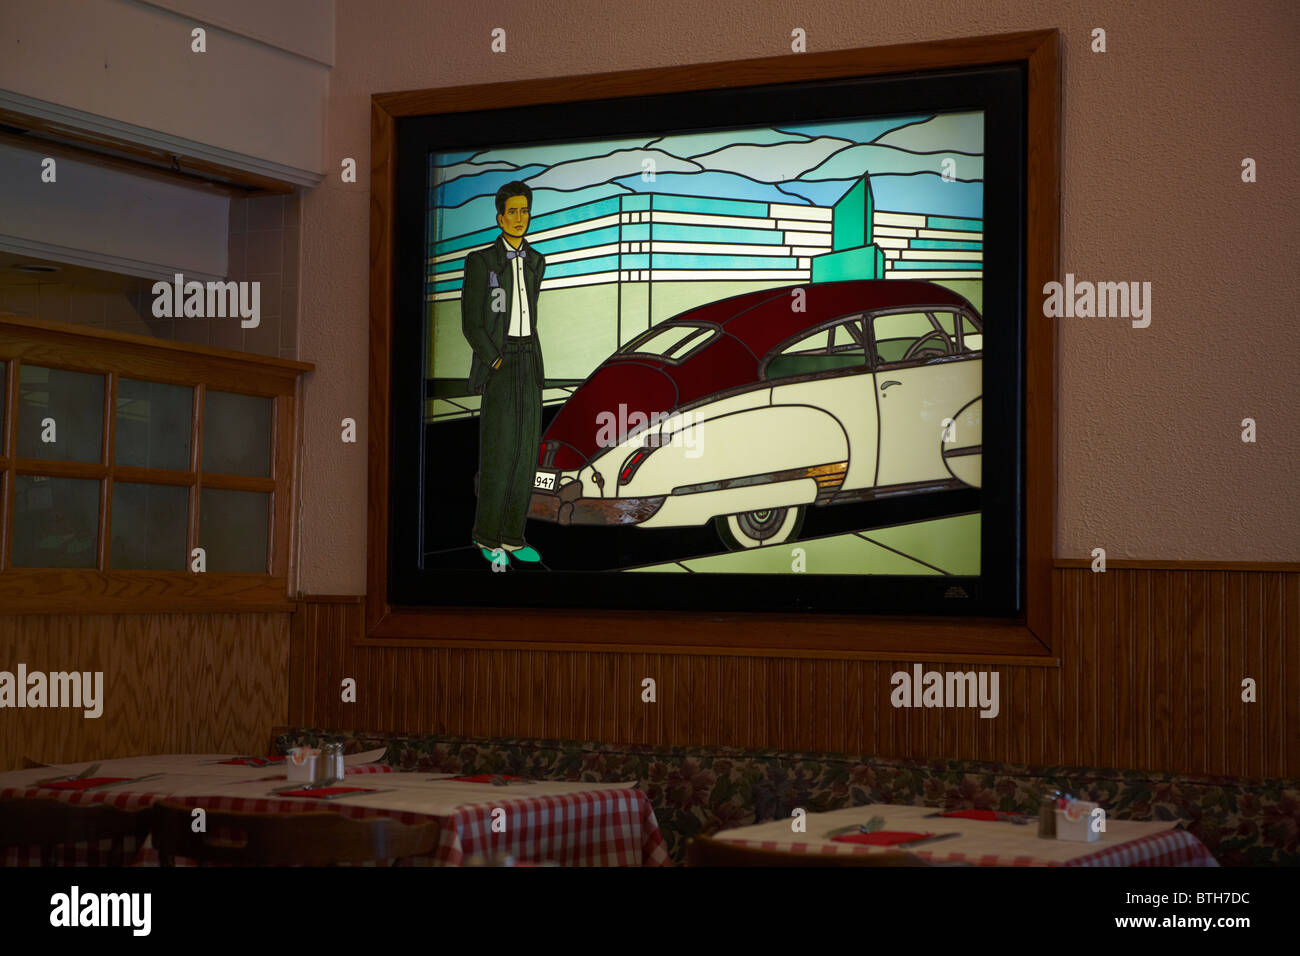 A contemporary stained glass art installation in an Italian restaurant. Stock Photo